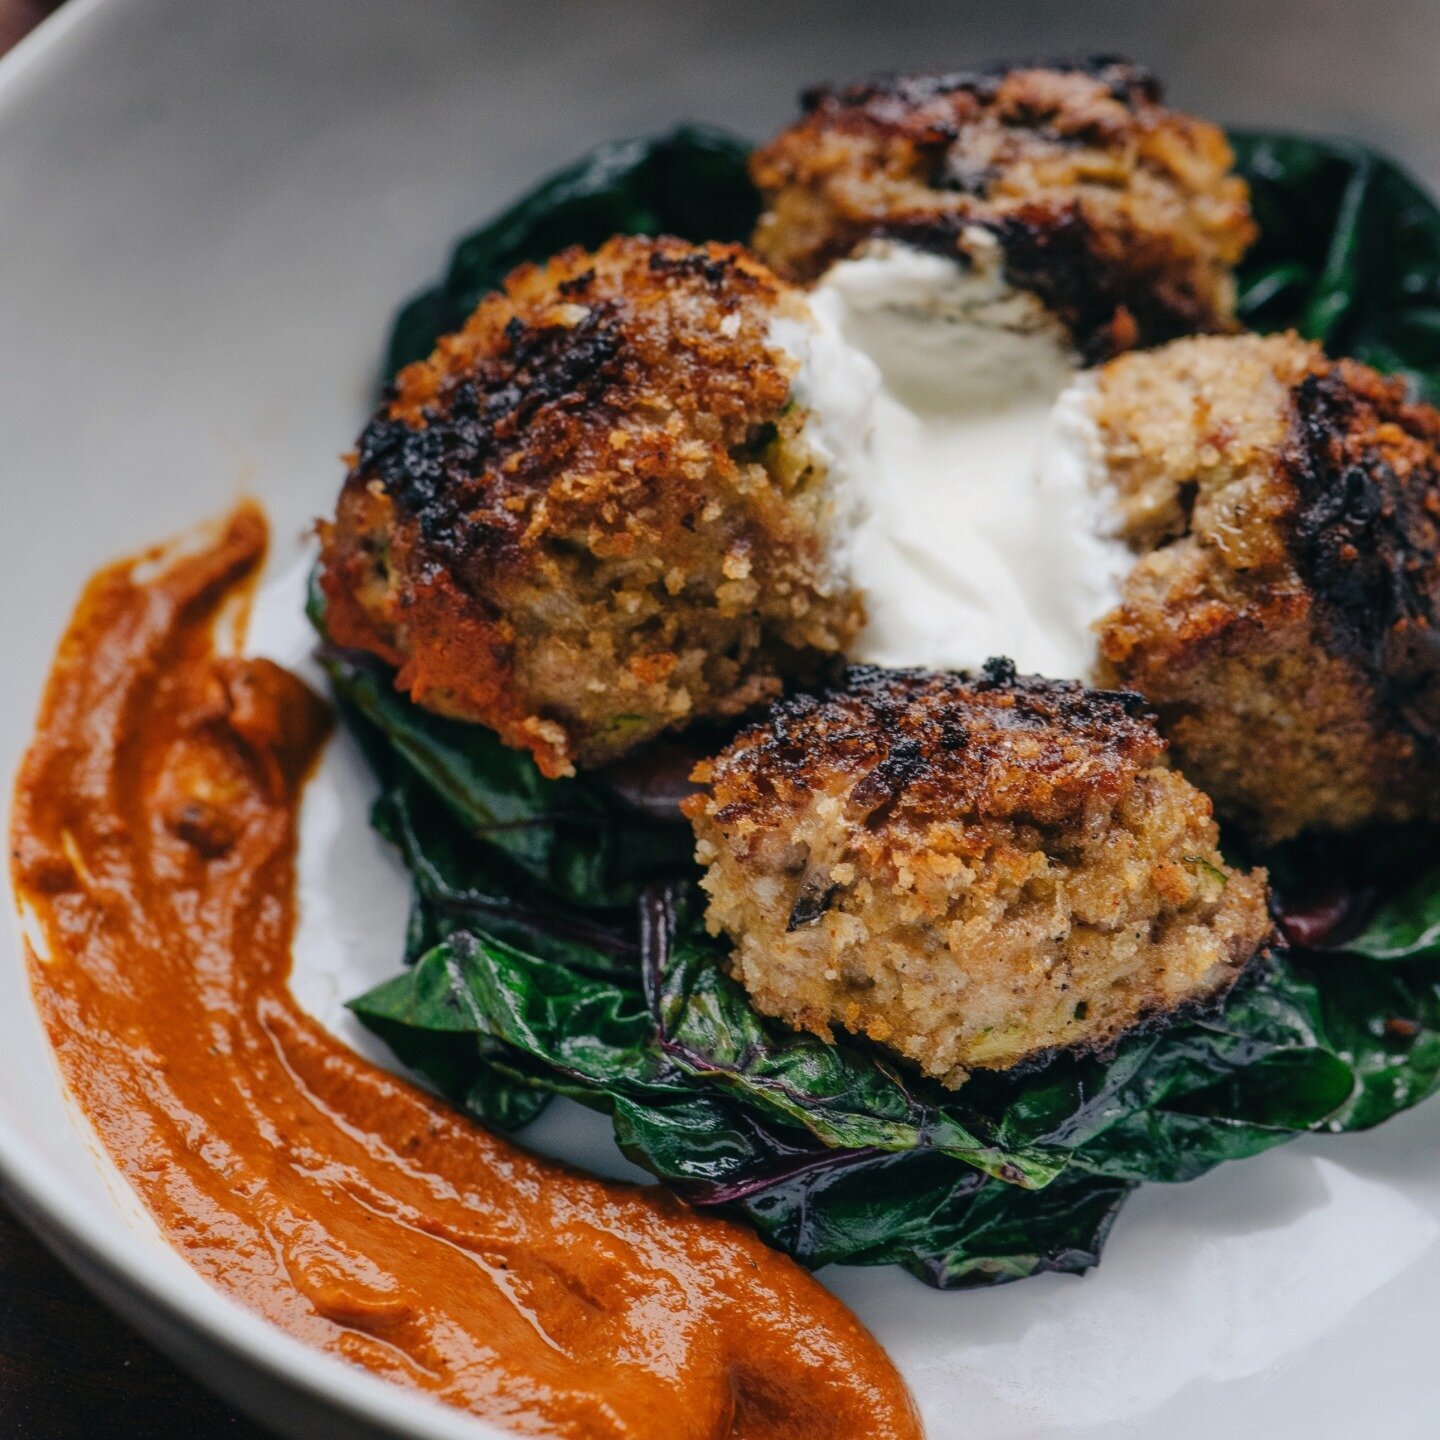 Albondigas De Cordero 

Lamb meatballs with roncal over wilted local arugula and pecan romesco topped with lemon sherry yogurt. Have you explored our tapas menu yet? Check it out via the link in our bio #laurelonrutledge